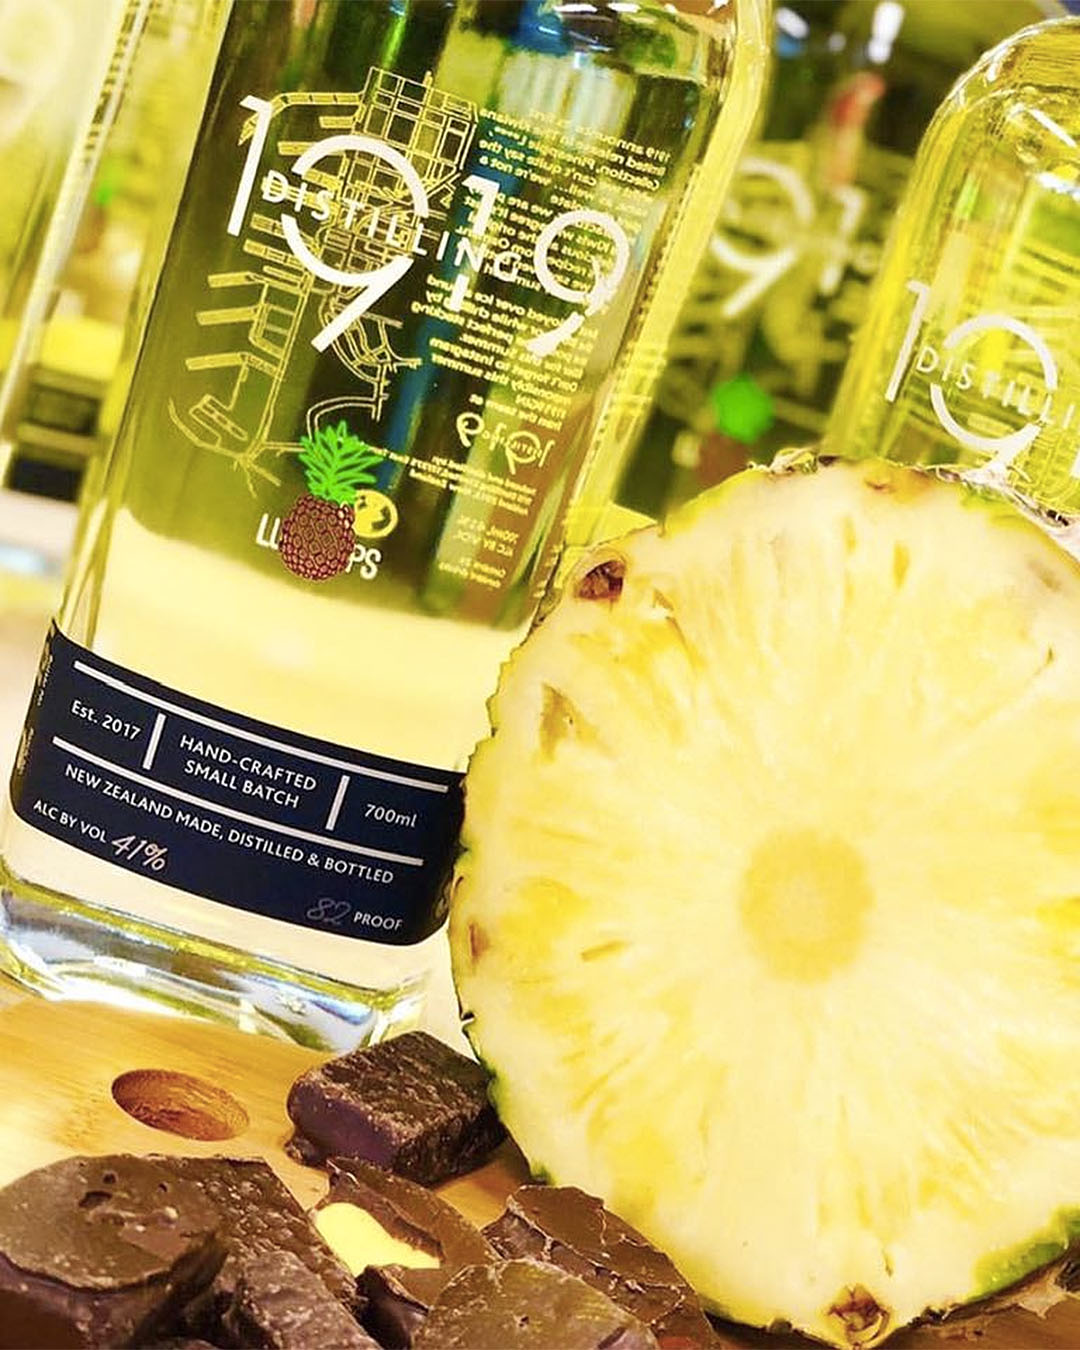 Pineapple lumps inspired gin from 1919.